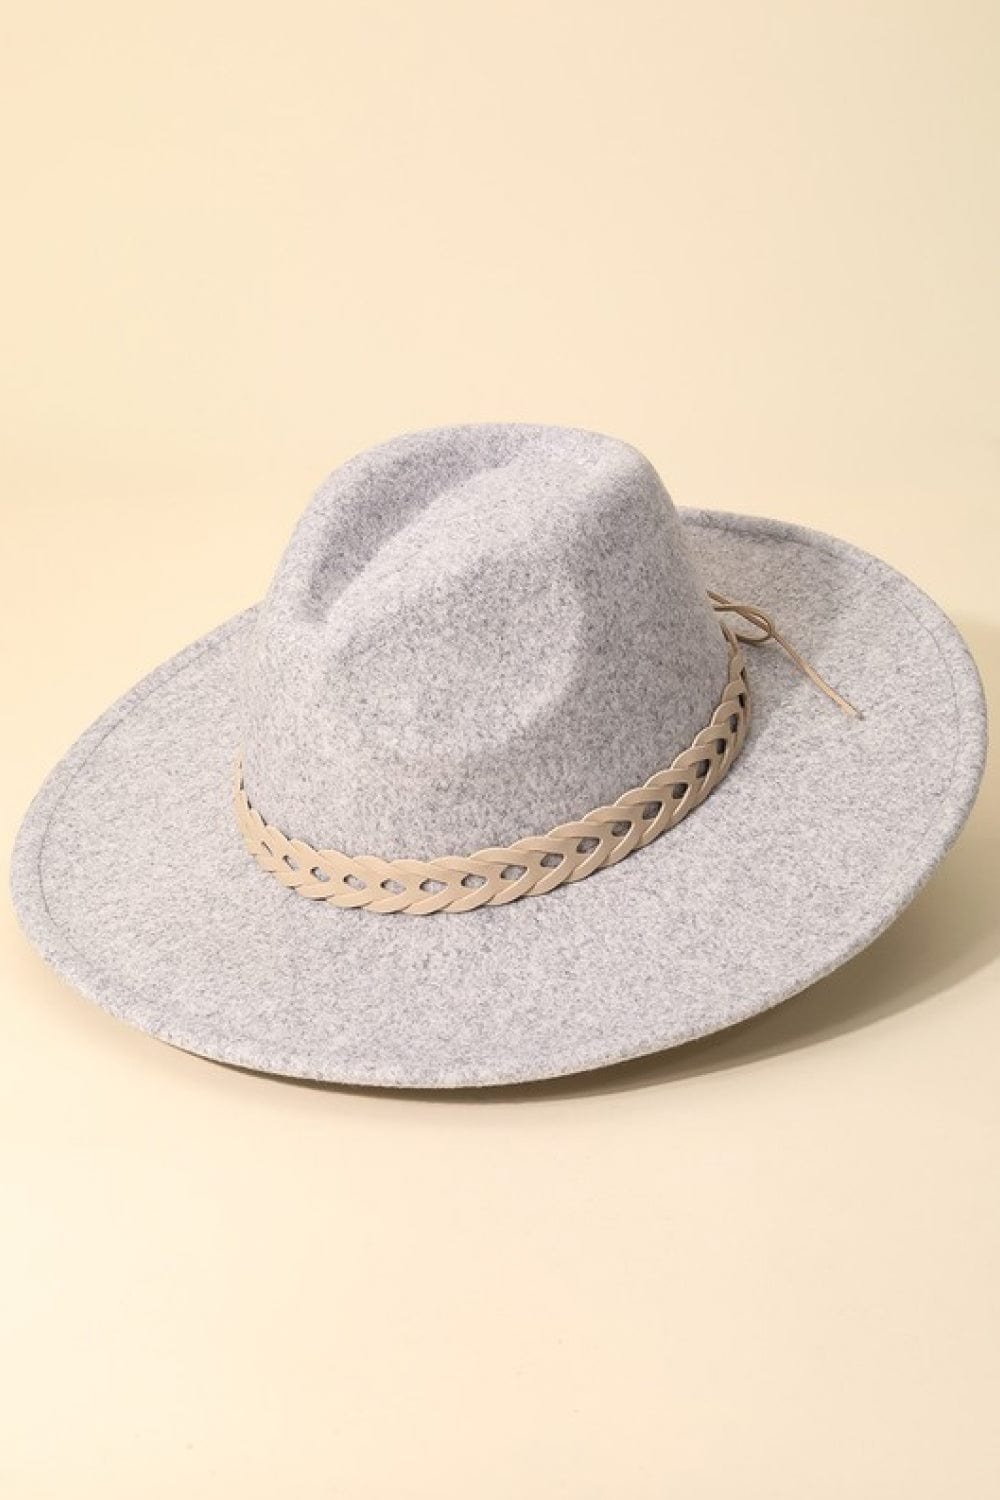 Woven Together Braided Strap Fedora - Body By J'ne